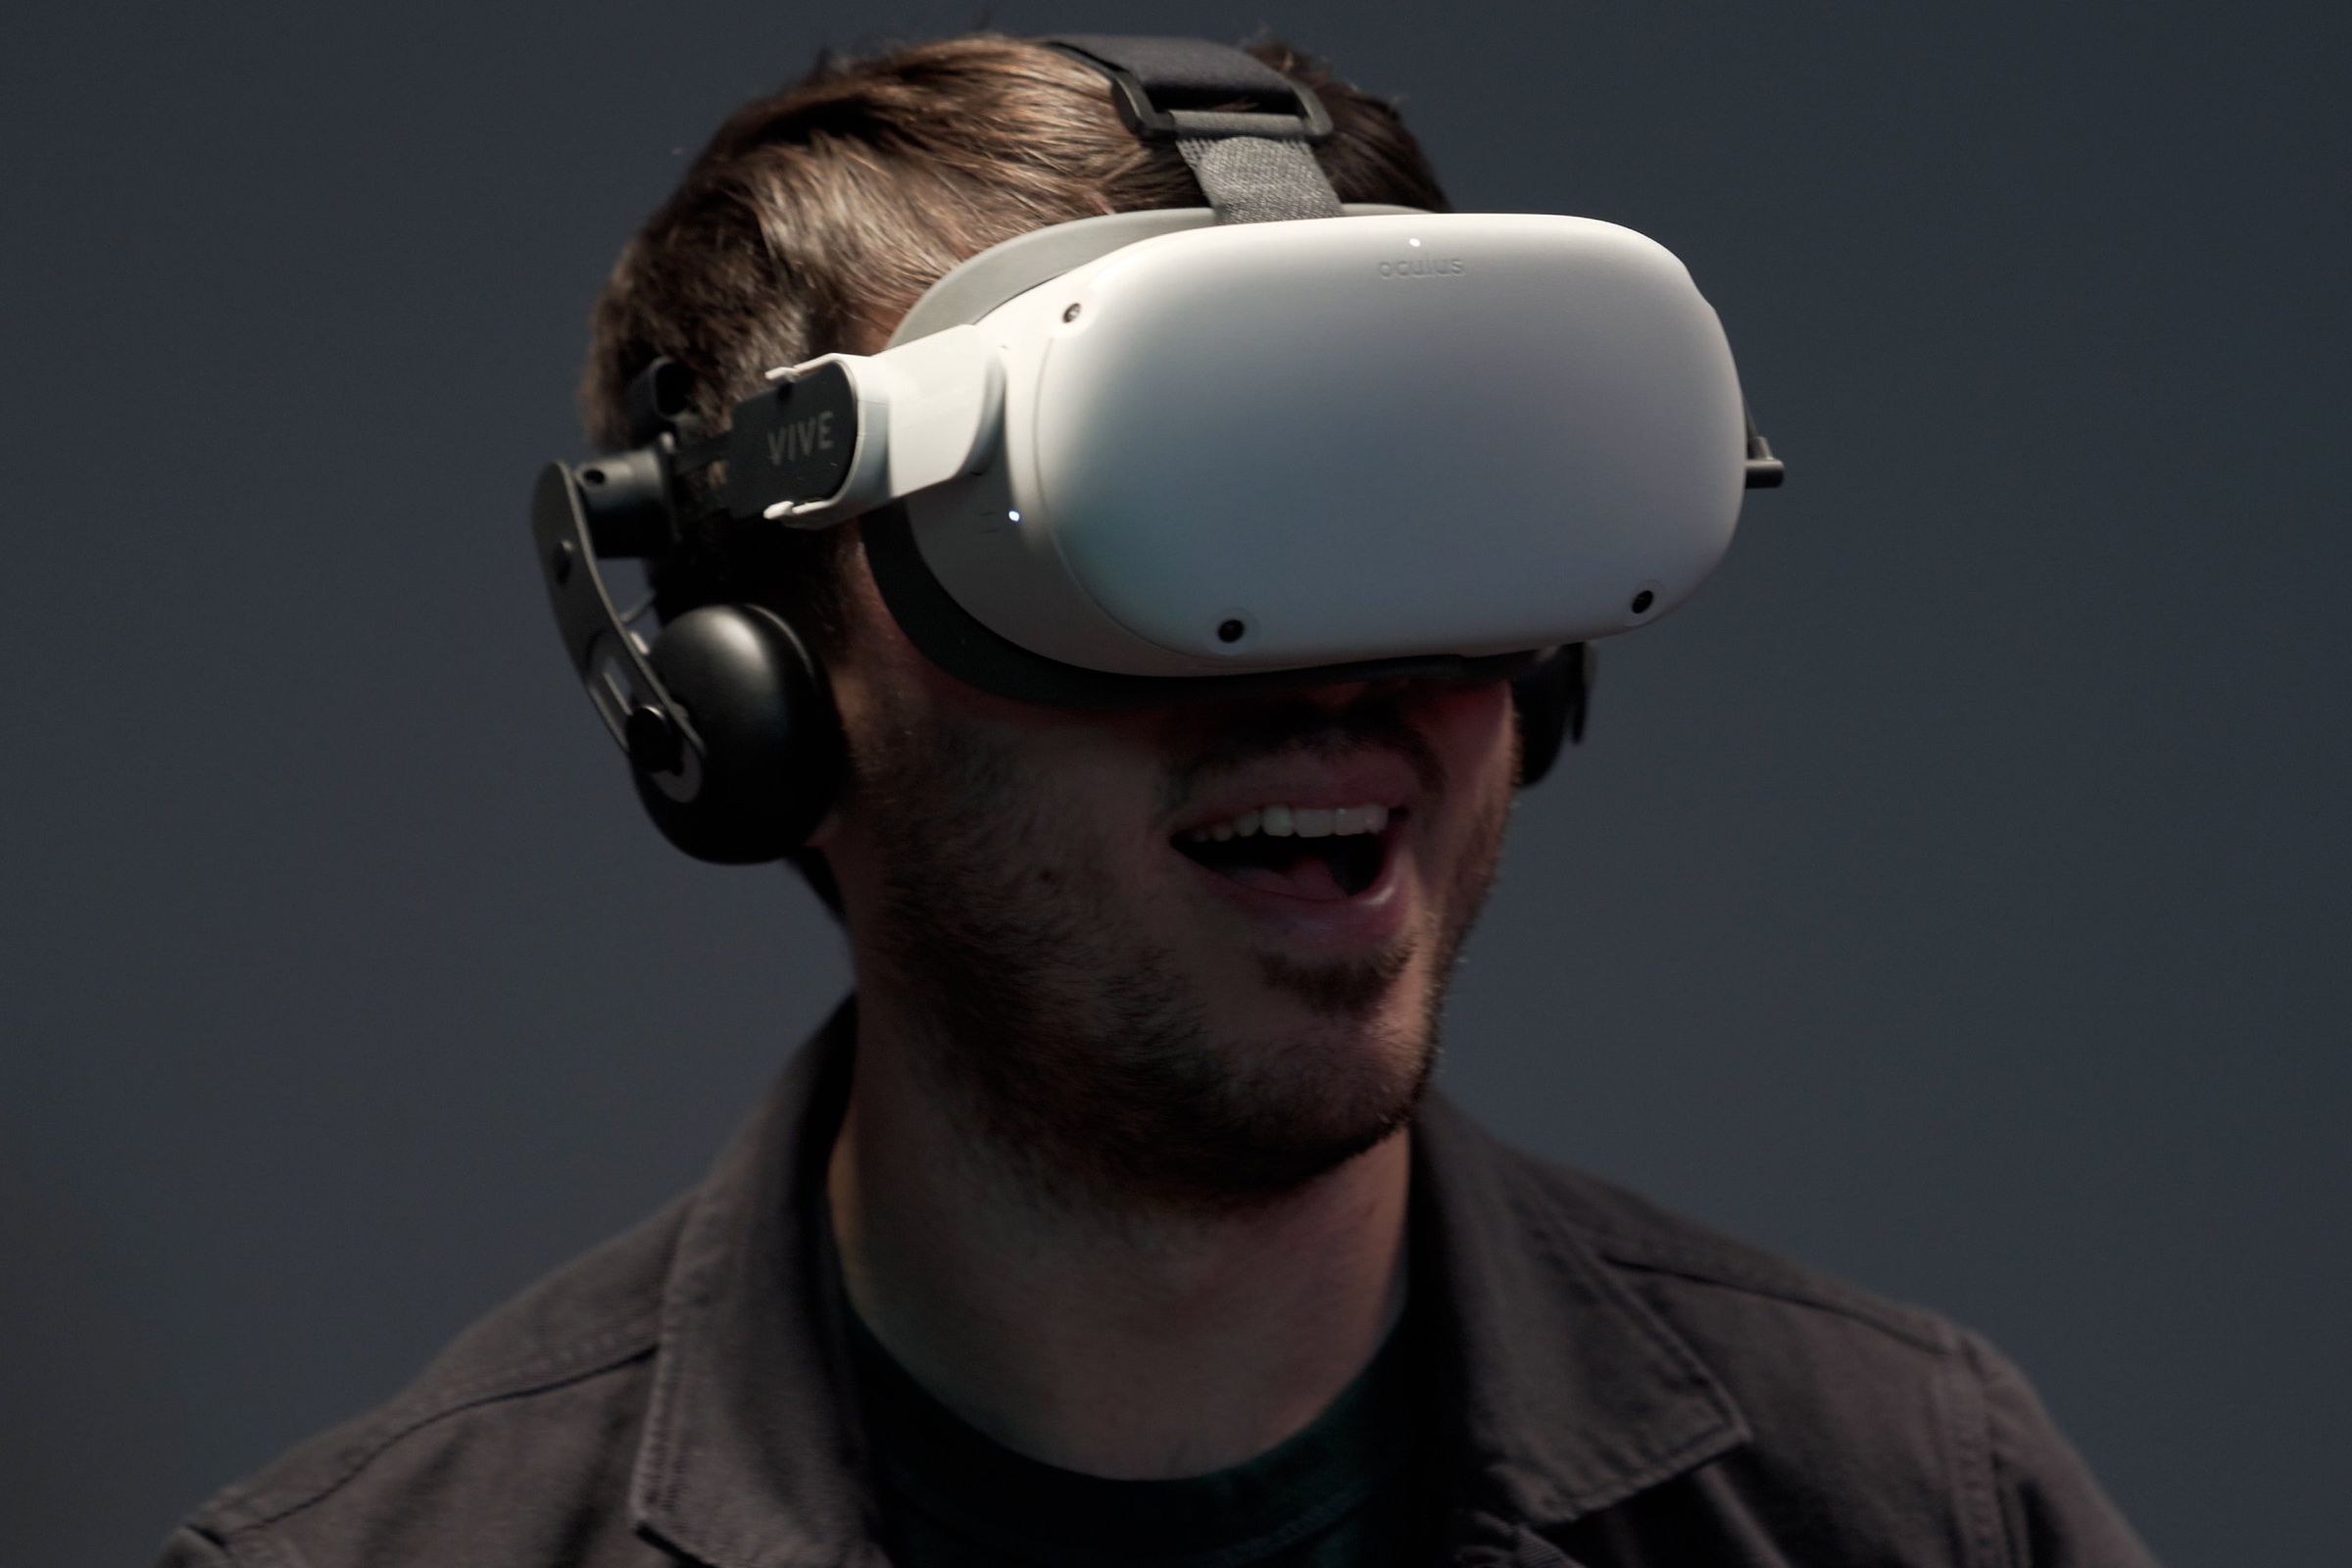 former verge staff Cameron Faulkner joyfully wears a meta quest 2 with an htc vive deluxe audio strap